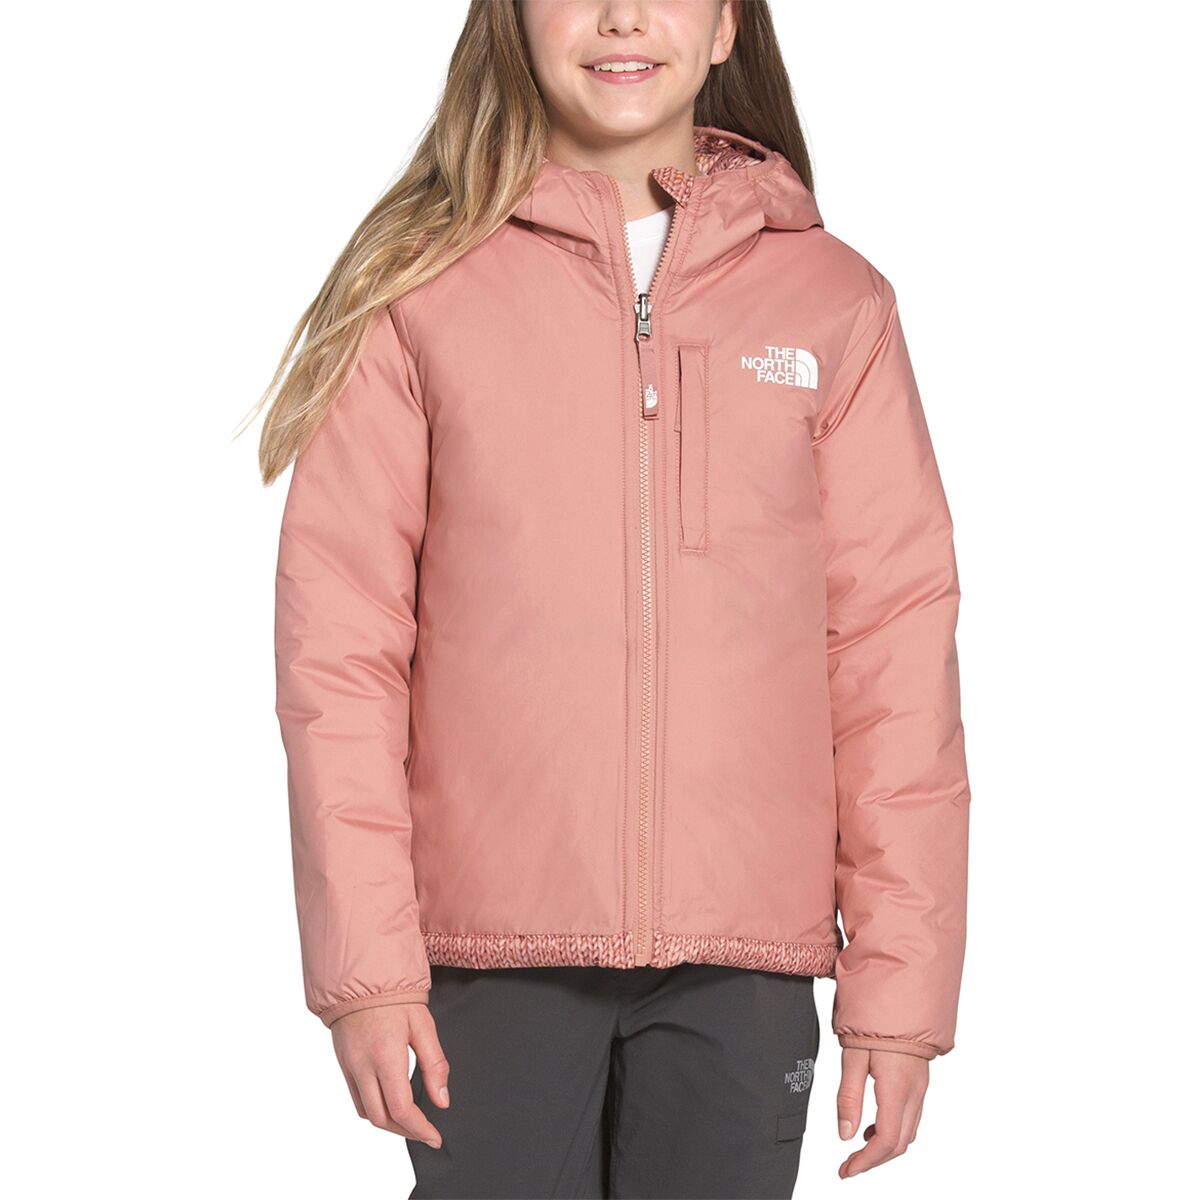 The North Face Reversible Perrito Jacket - Girls' - Kids